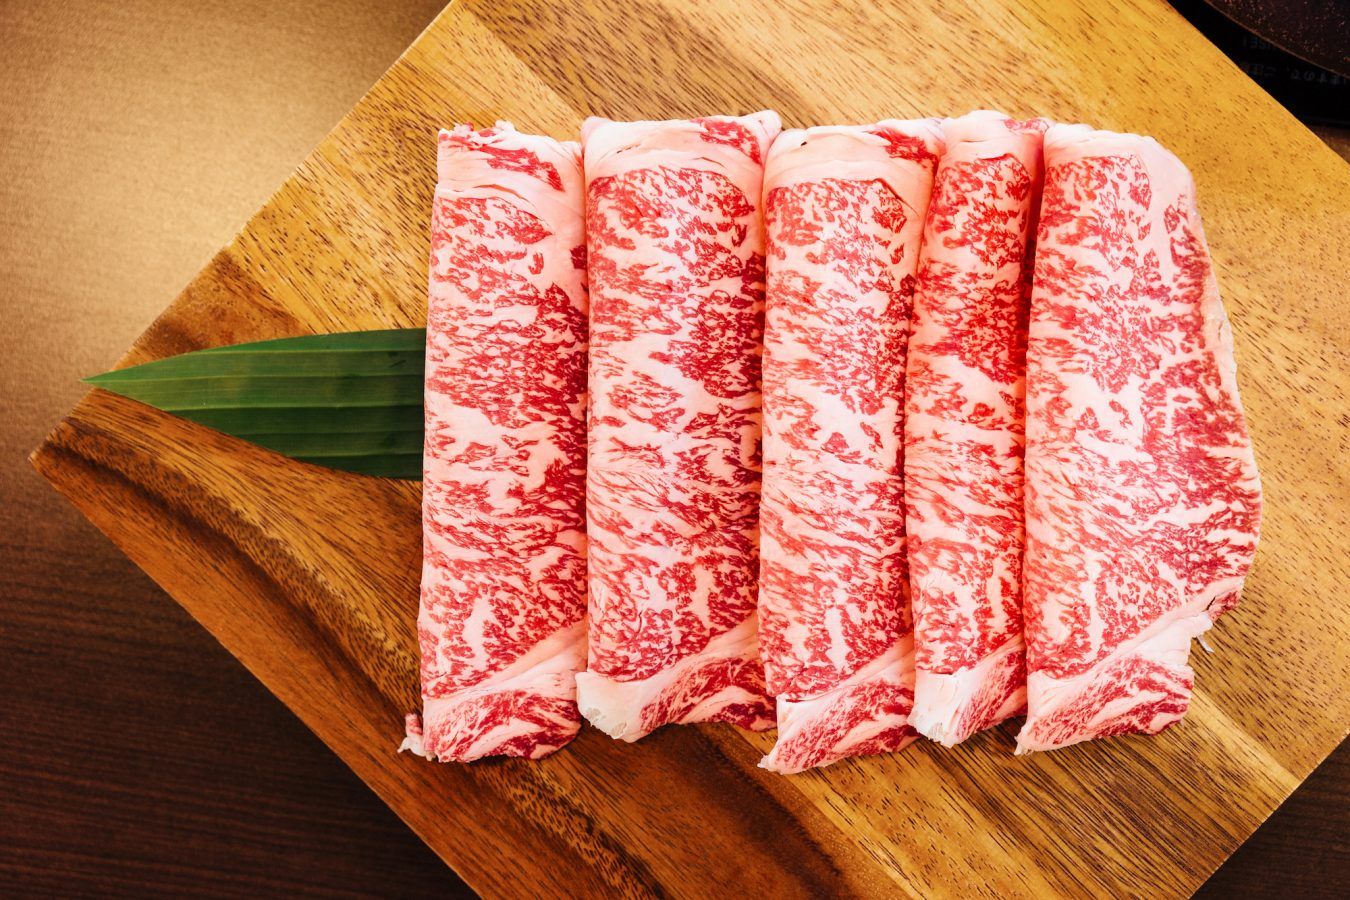 The best places to buy premium wagyu beef in Singapore